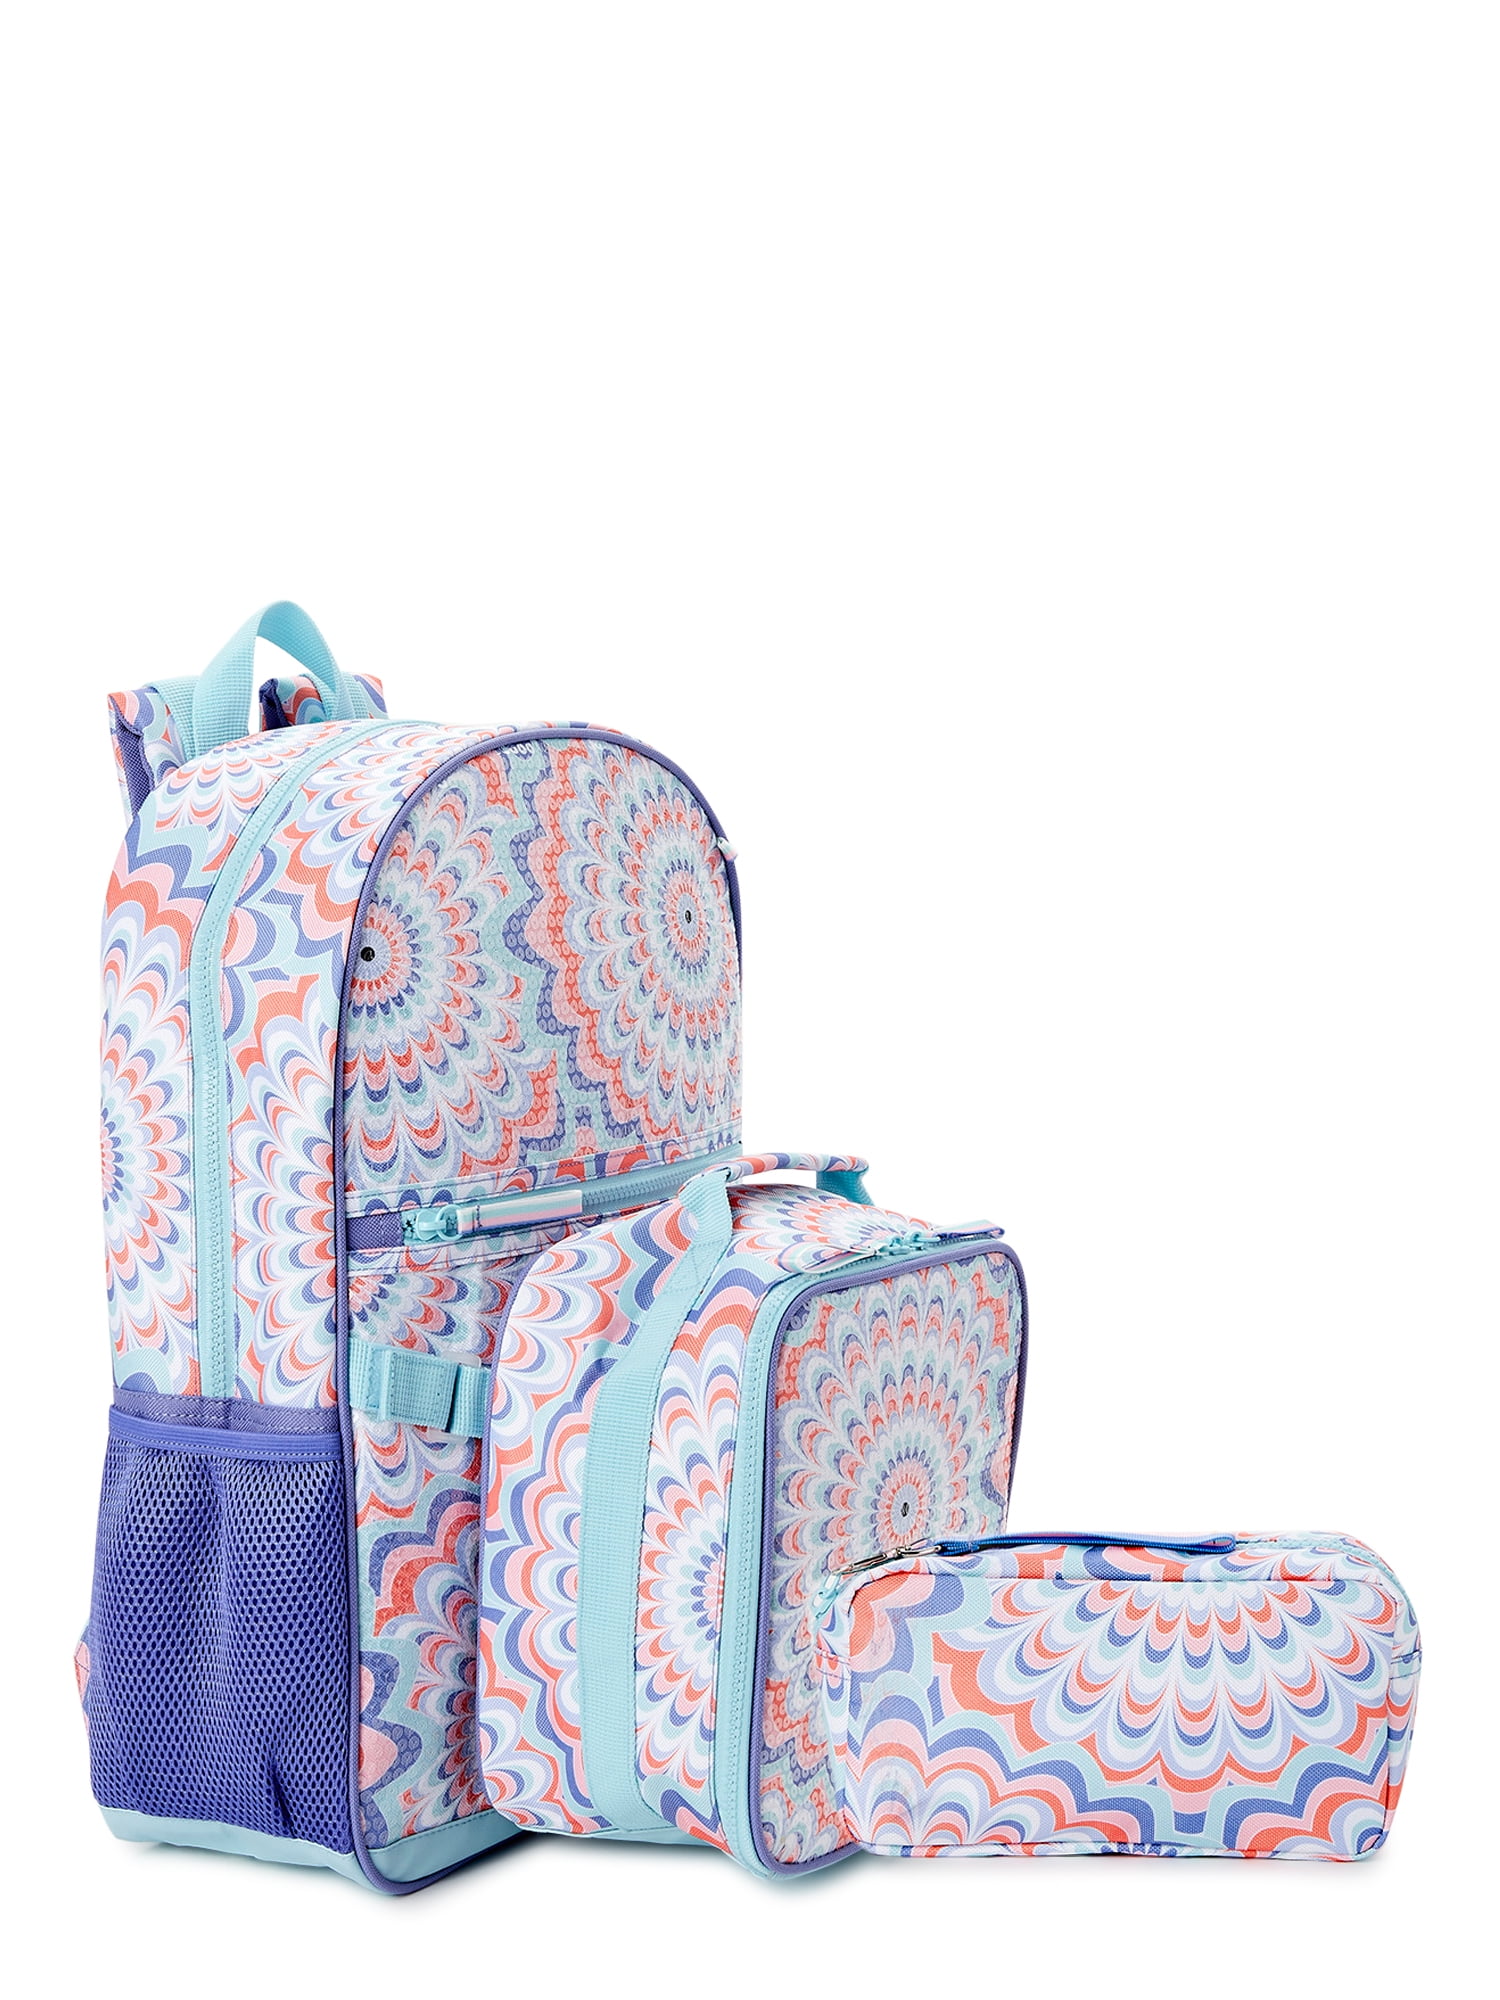 Kids Backpack and Lunch Box Set, Butterfly, Green, Gives Back to